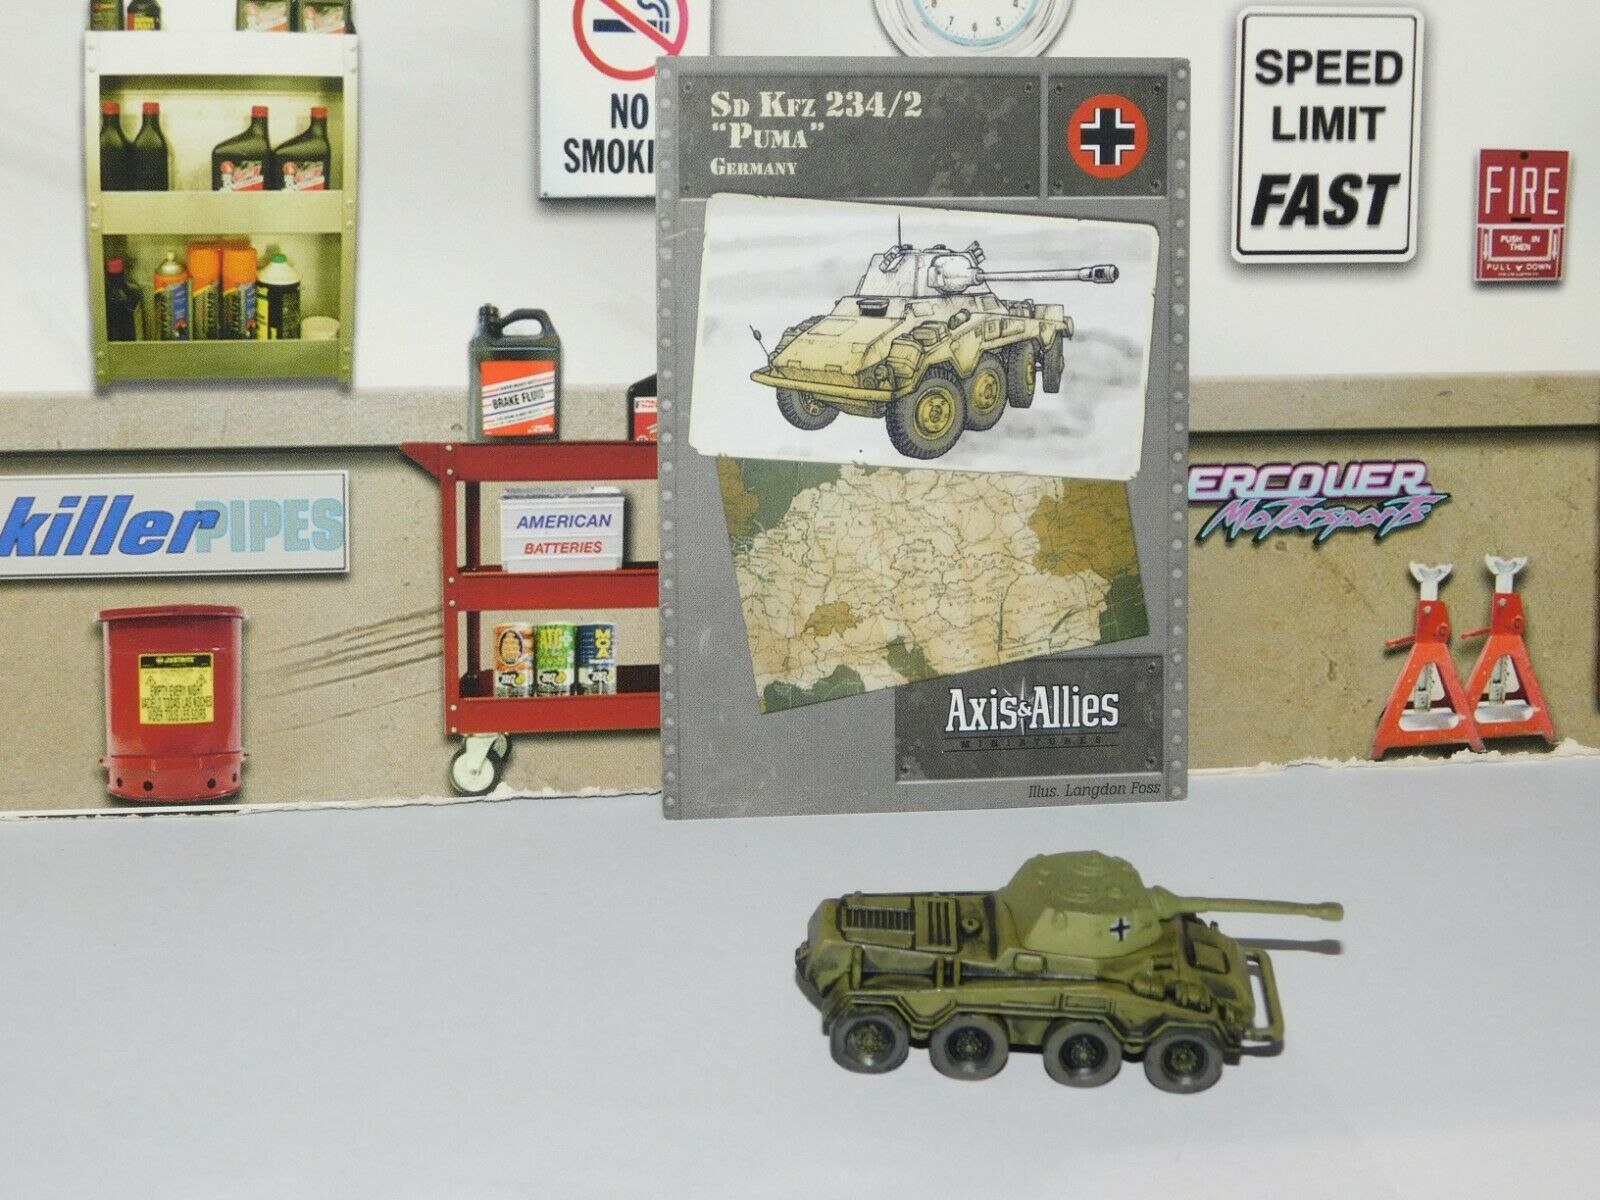 AXIS & ALLIES MINIATURES CONTESTED SKIES #35 SD KFZ 234/2 